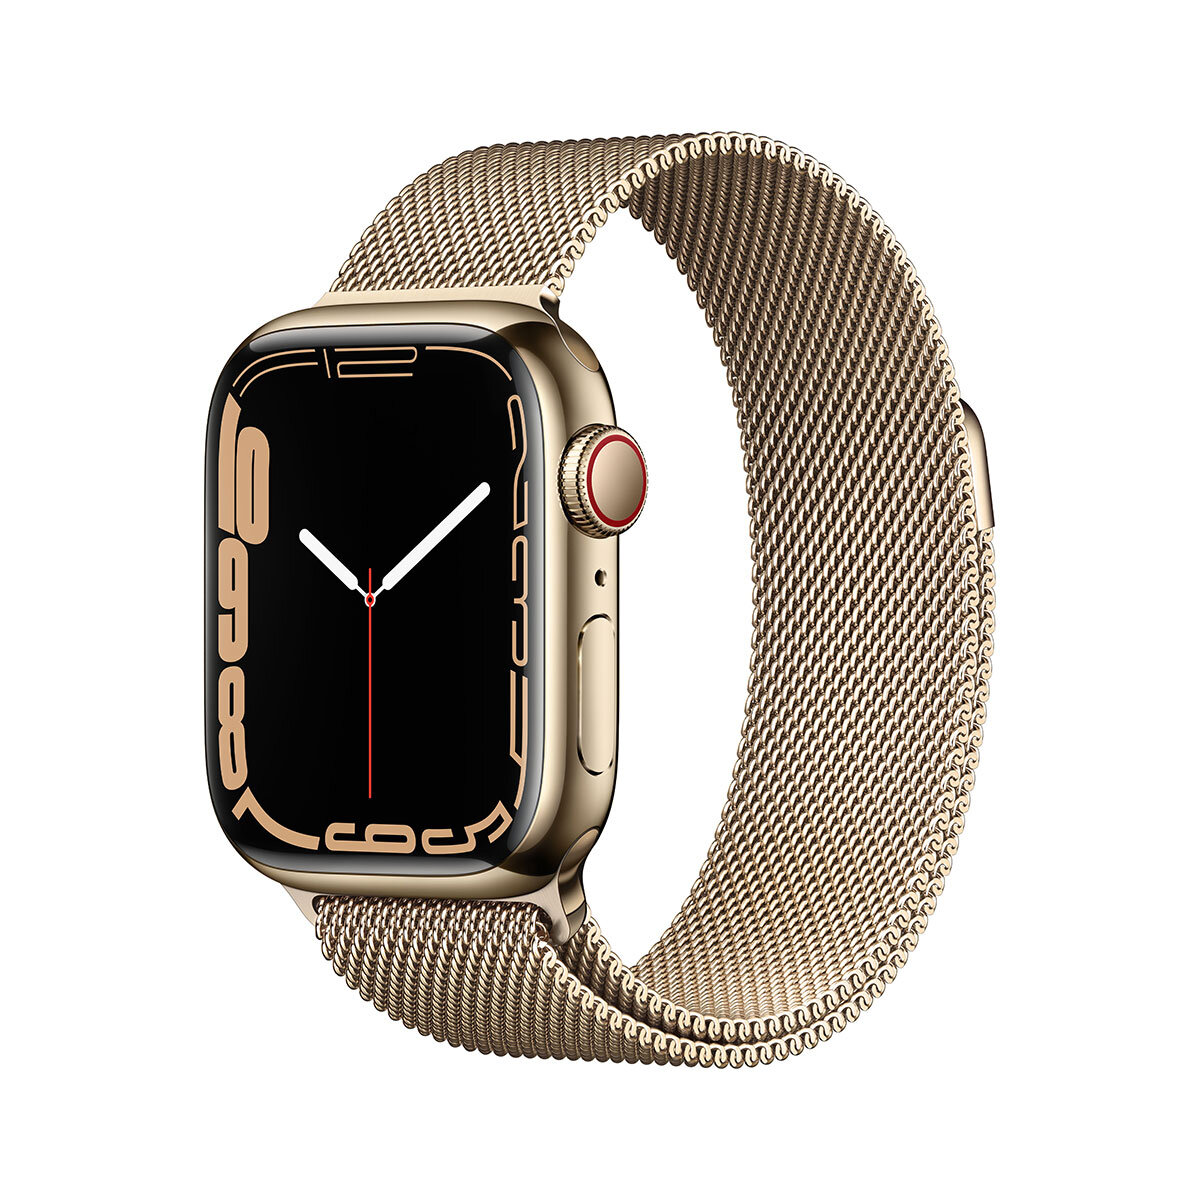 Buy Apple Watch Series 7 GPS + Cellular, 41mm Stainless Steel Case at costco.co.uk